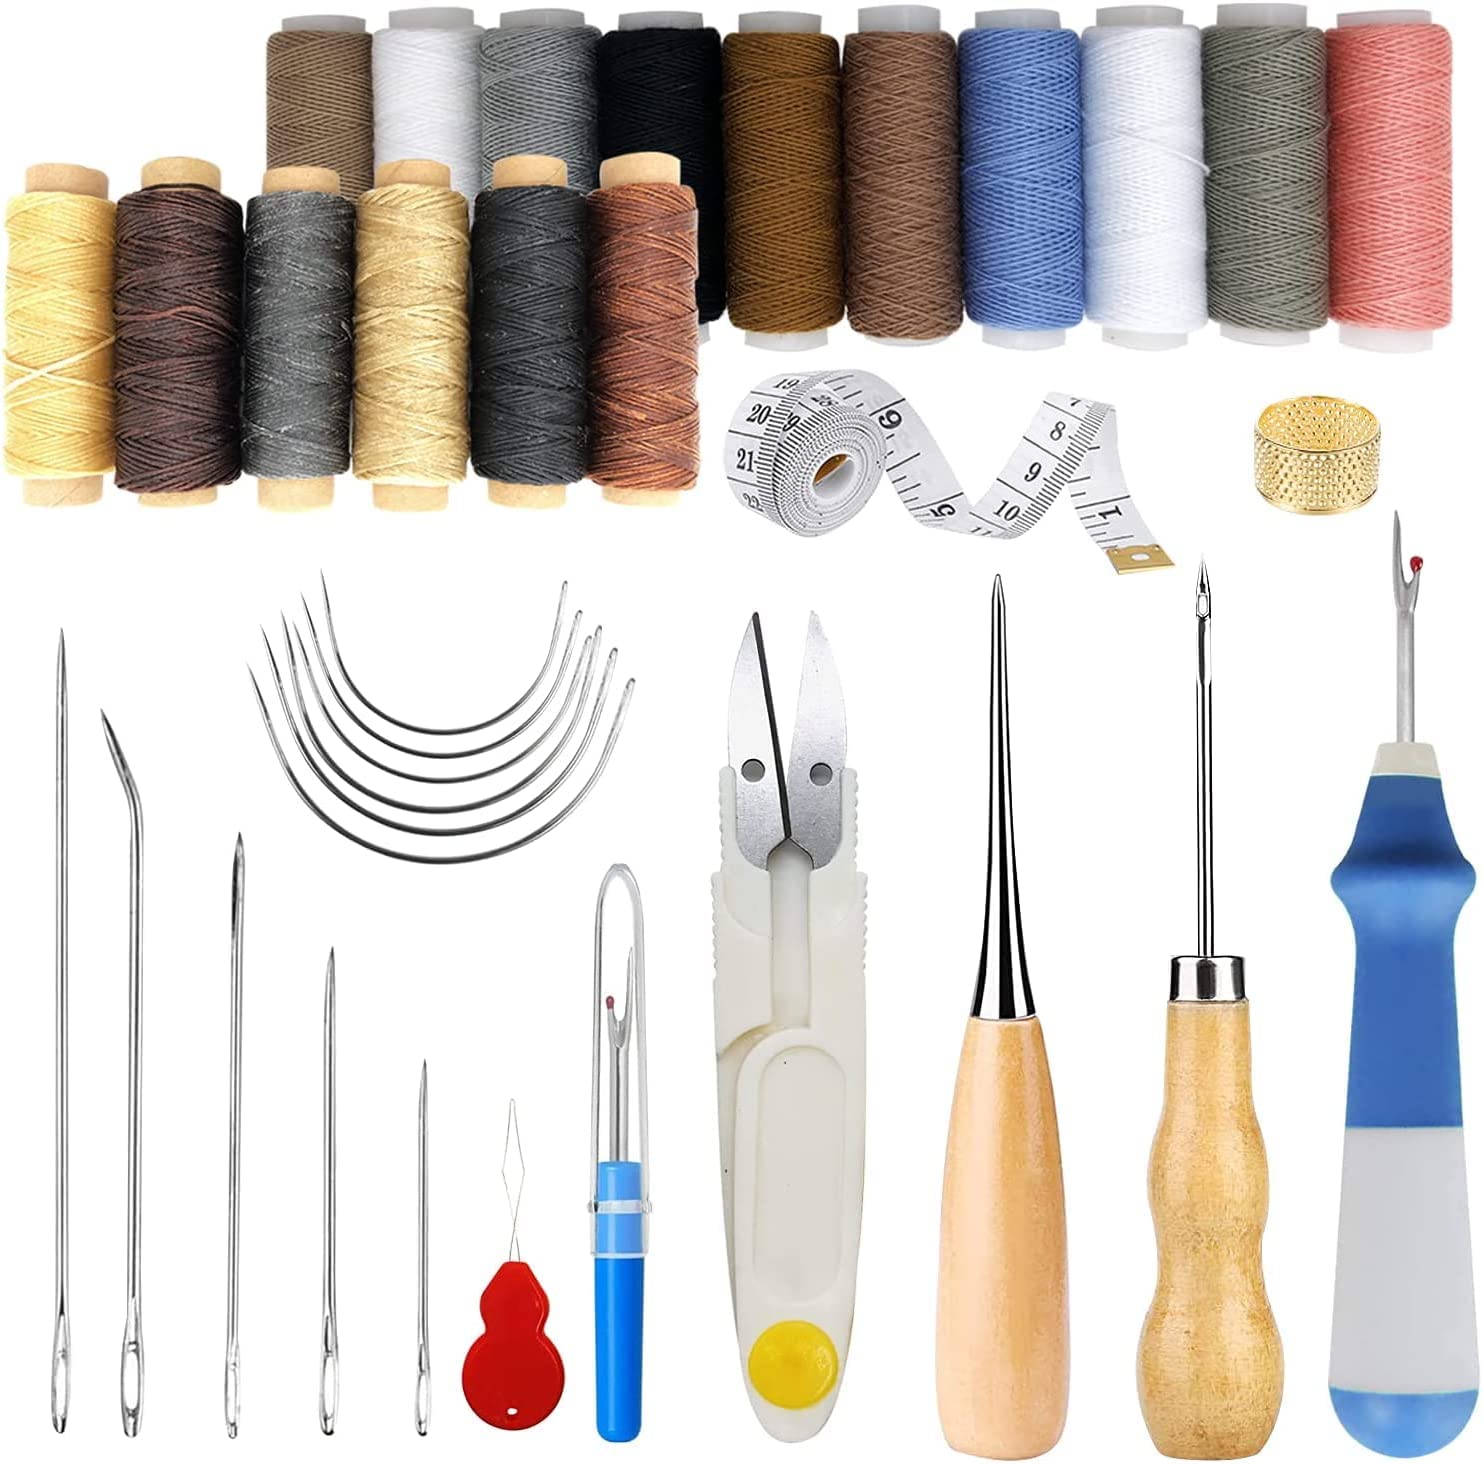  30 PCS Upholstery Repair Kit, Leather Sewing Repair Kit with  Sewing Thread, Large Eye Leather Sewing Needles, Awl, Leather Hand Sewing  Needles, Leather Craft Tool Kit for Leather Repair, Stitching 